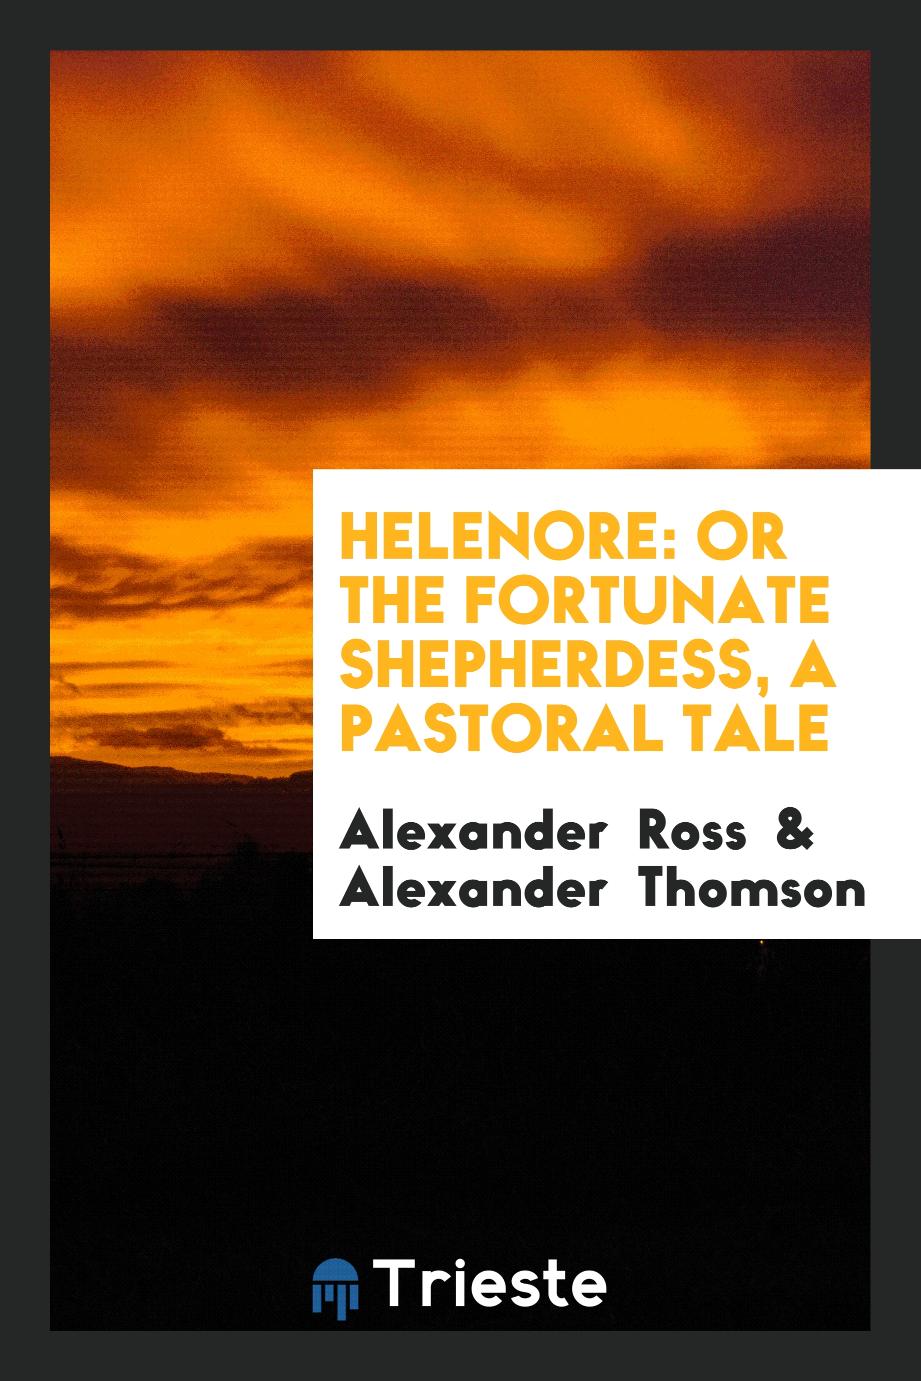 Helenore: Or the Fortunate Shepherdess, a Pastoral Tale